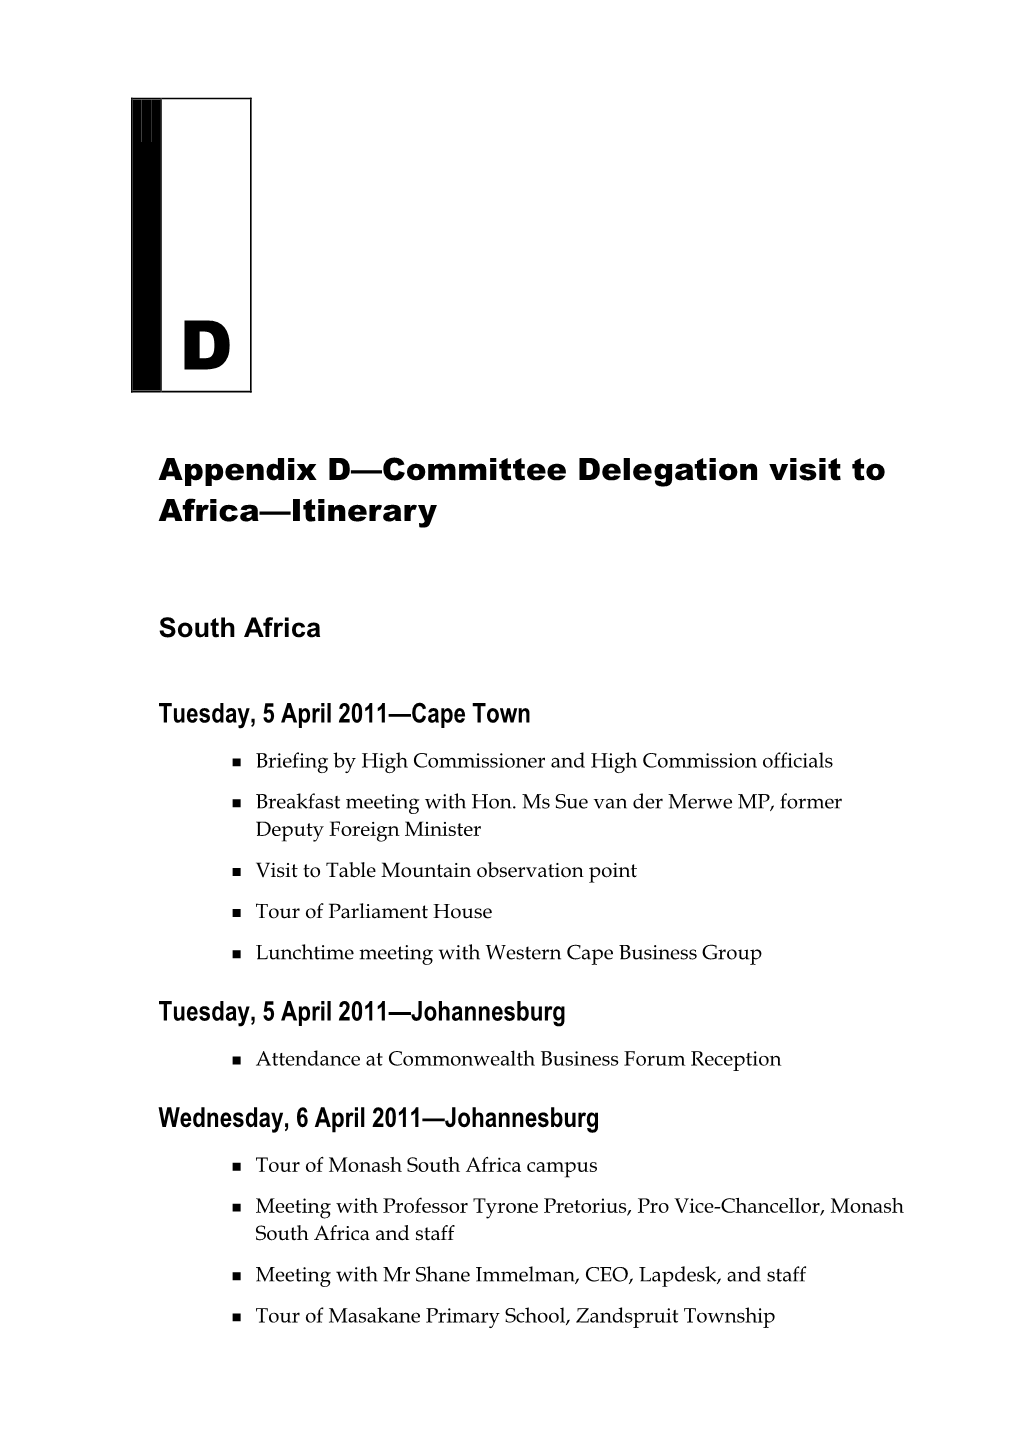 Appendix D: Committee Delegation Visit to Africa